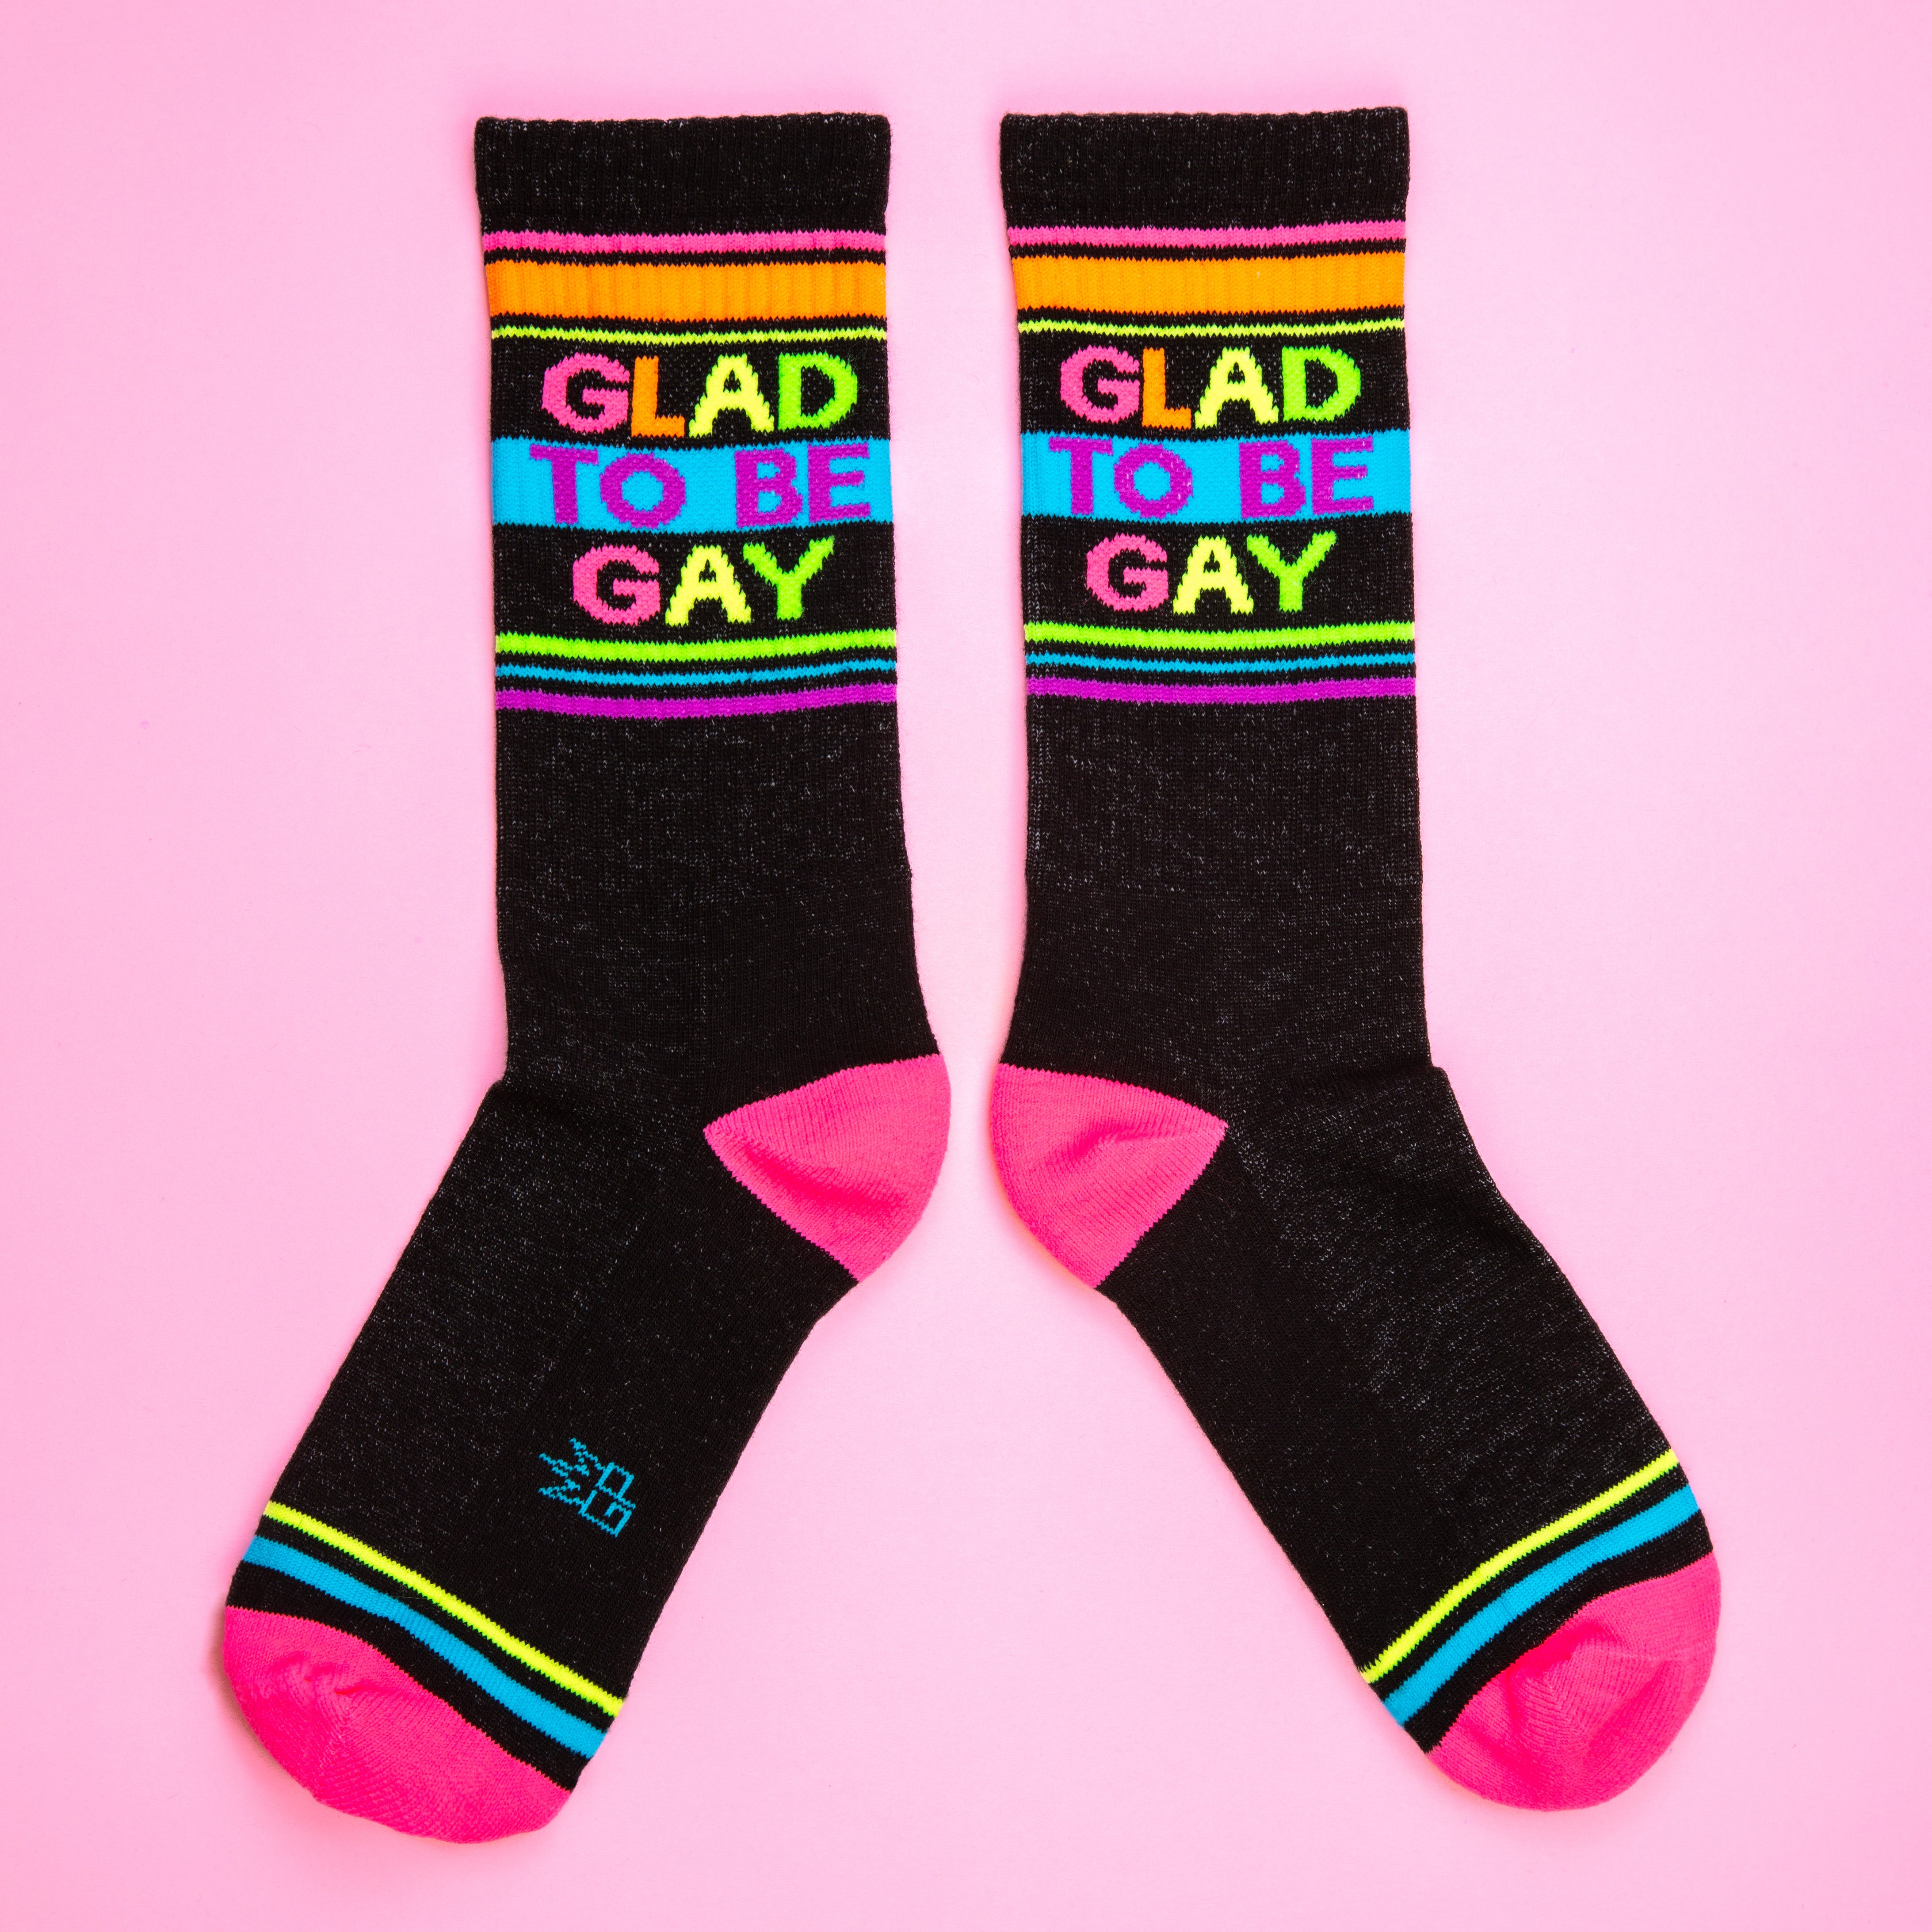 GLAD TO BE GAY